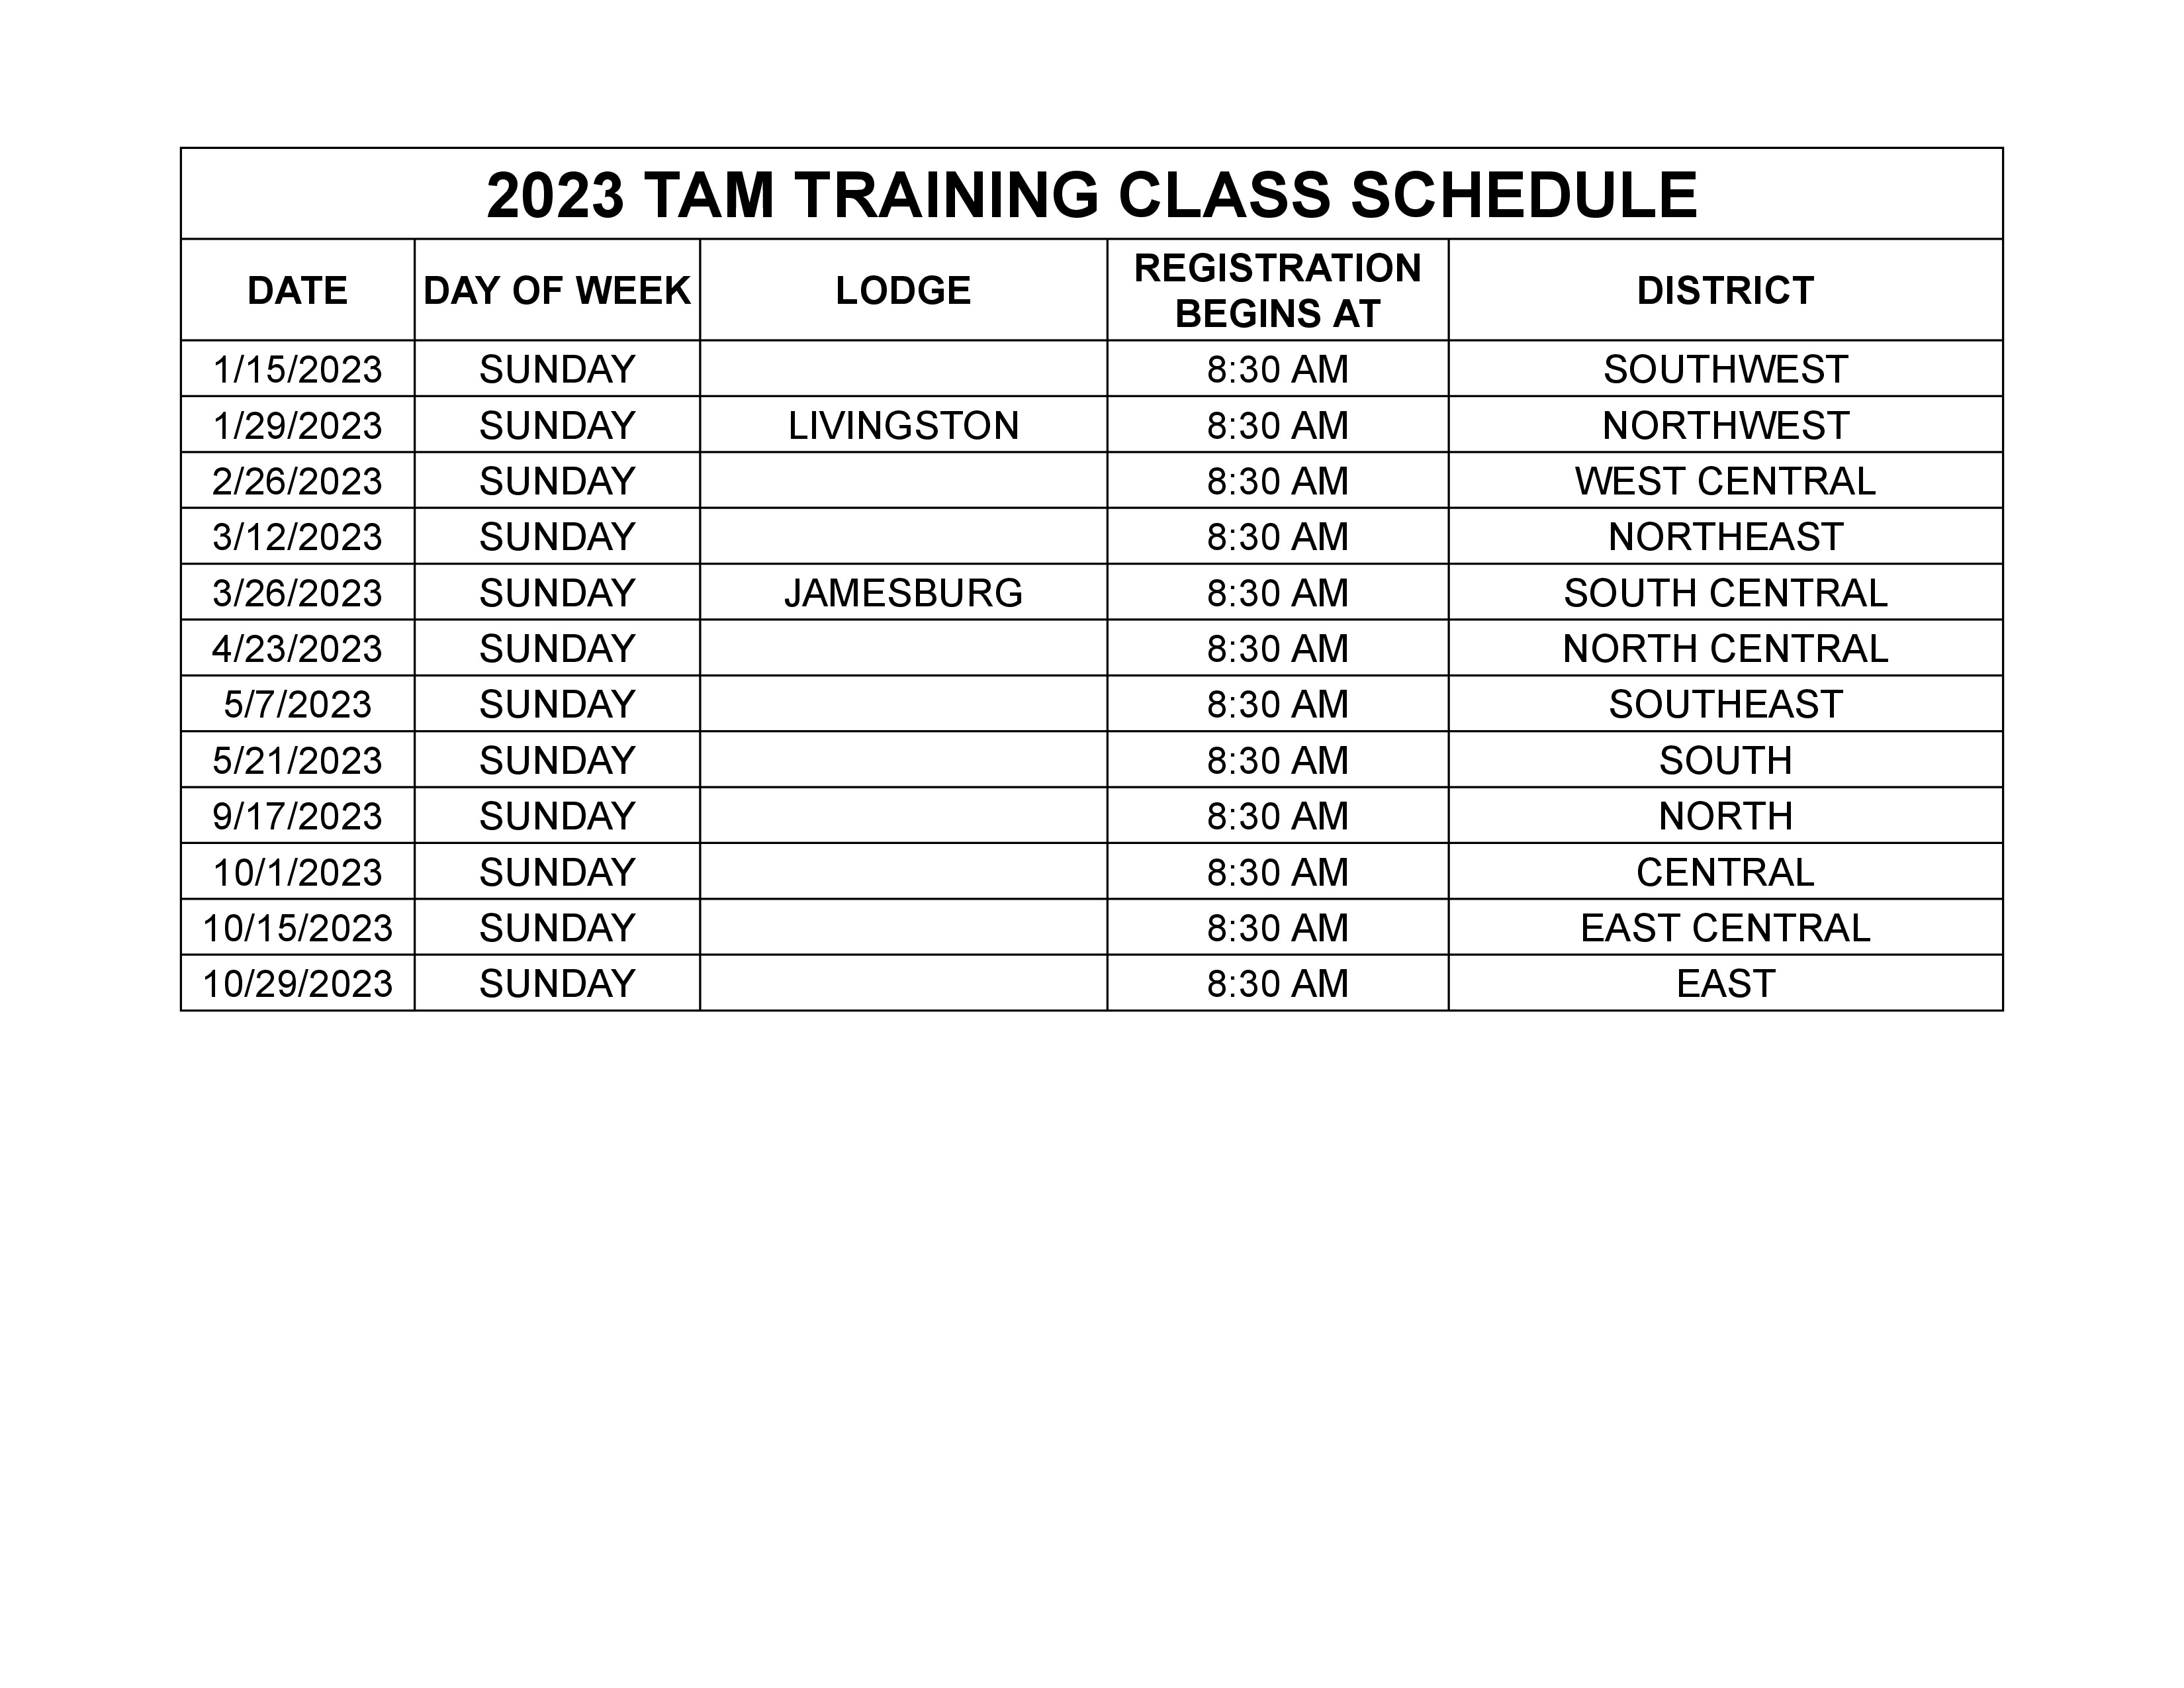 2023 TAM CLASS TRAINING SCHEDULE page 0